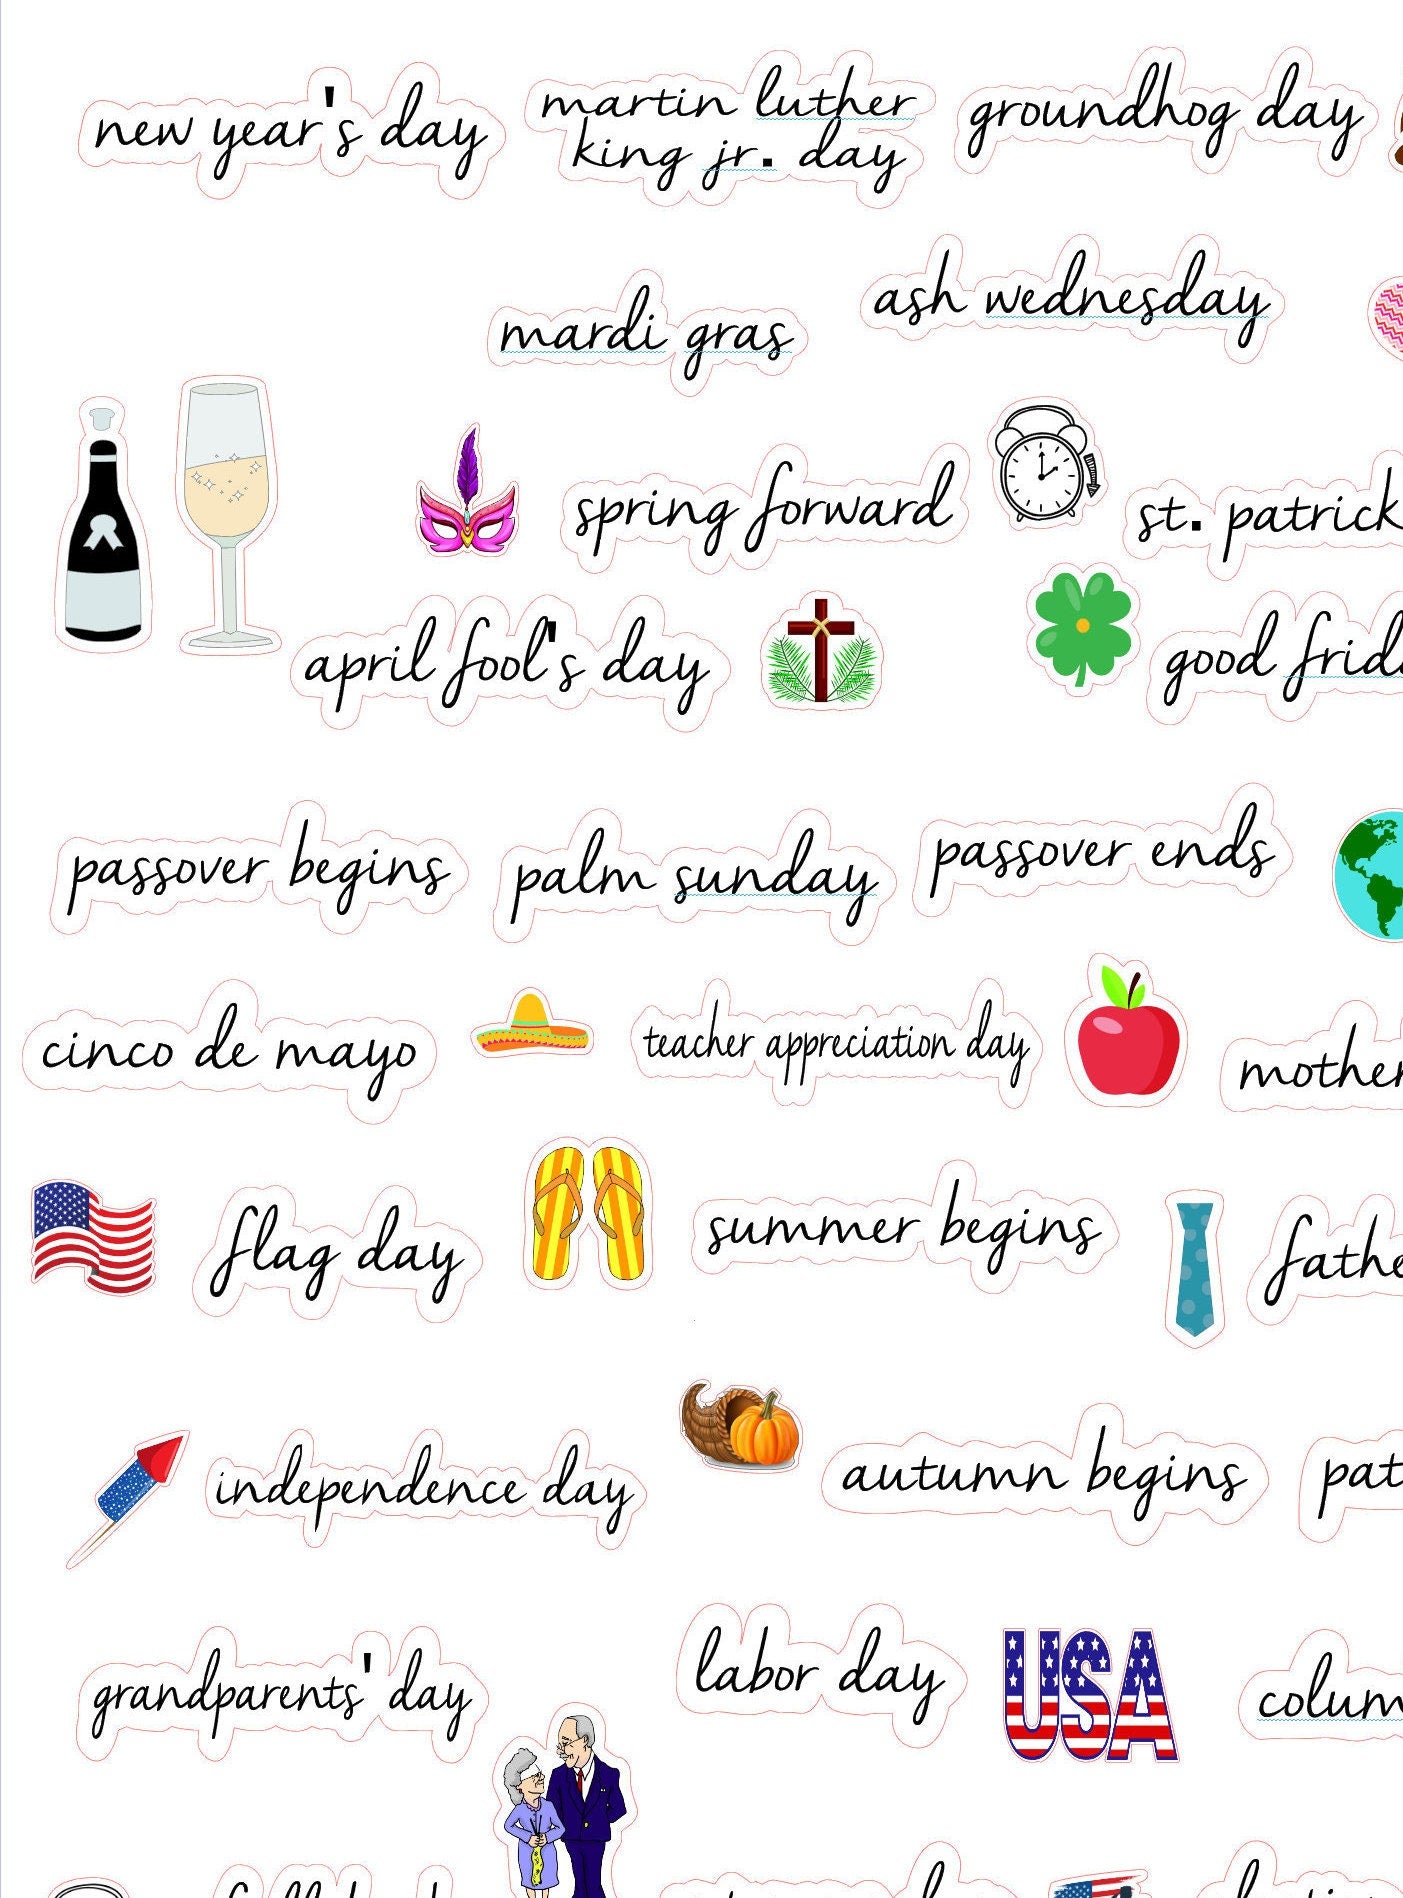 HOLIDAY STICKERS I106 - Holiday Planner Sticker - Icon Planner Sticker